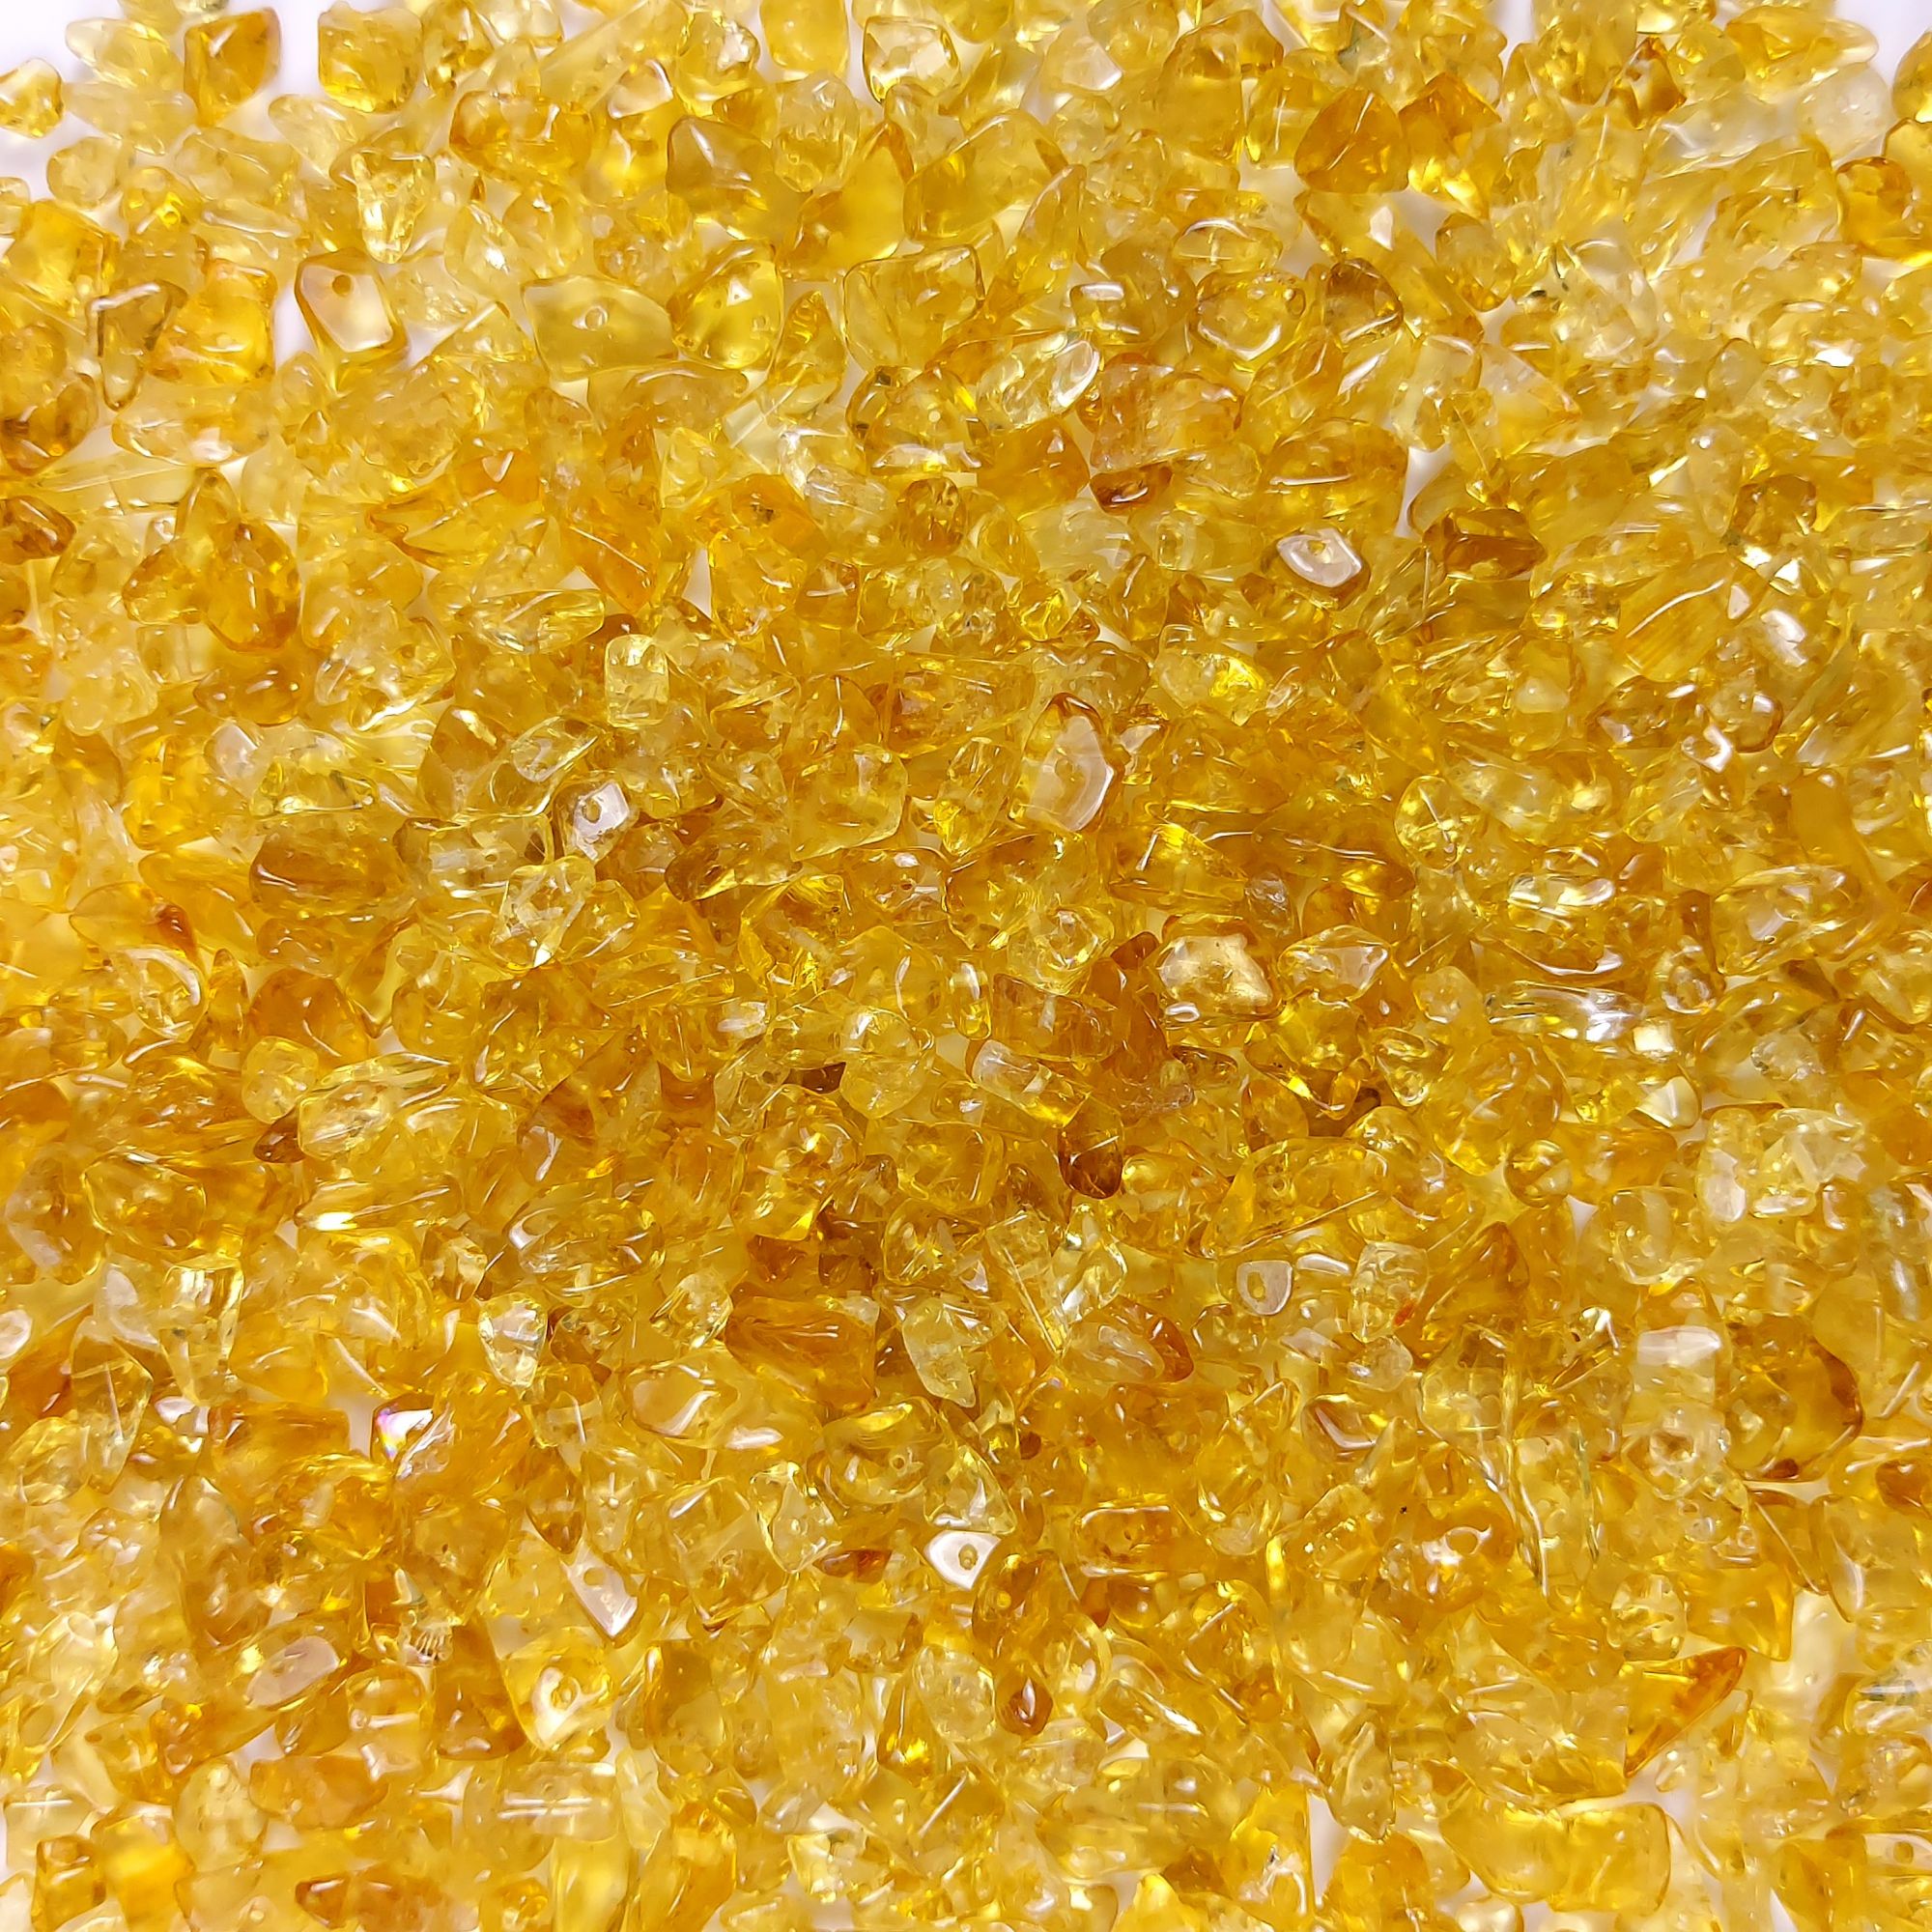 1155Pcs 912Cts  Natural Yellow Citrine Gemstone Chips Uncut Beads for Jewelry Making Center Drill Loose Gemstones Nuggets Chips Smooth Beads Bracelet Gift for Her 9x5 6x3mm#G-405